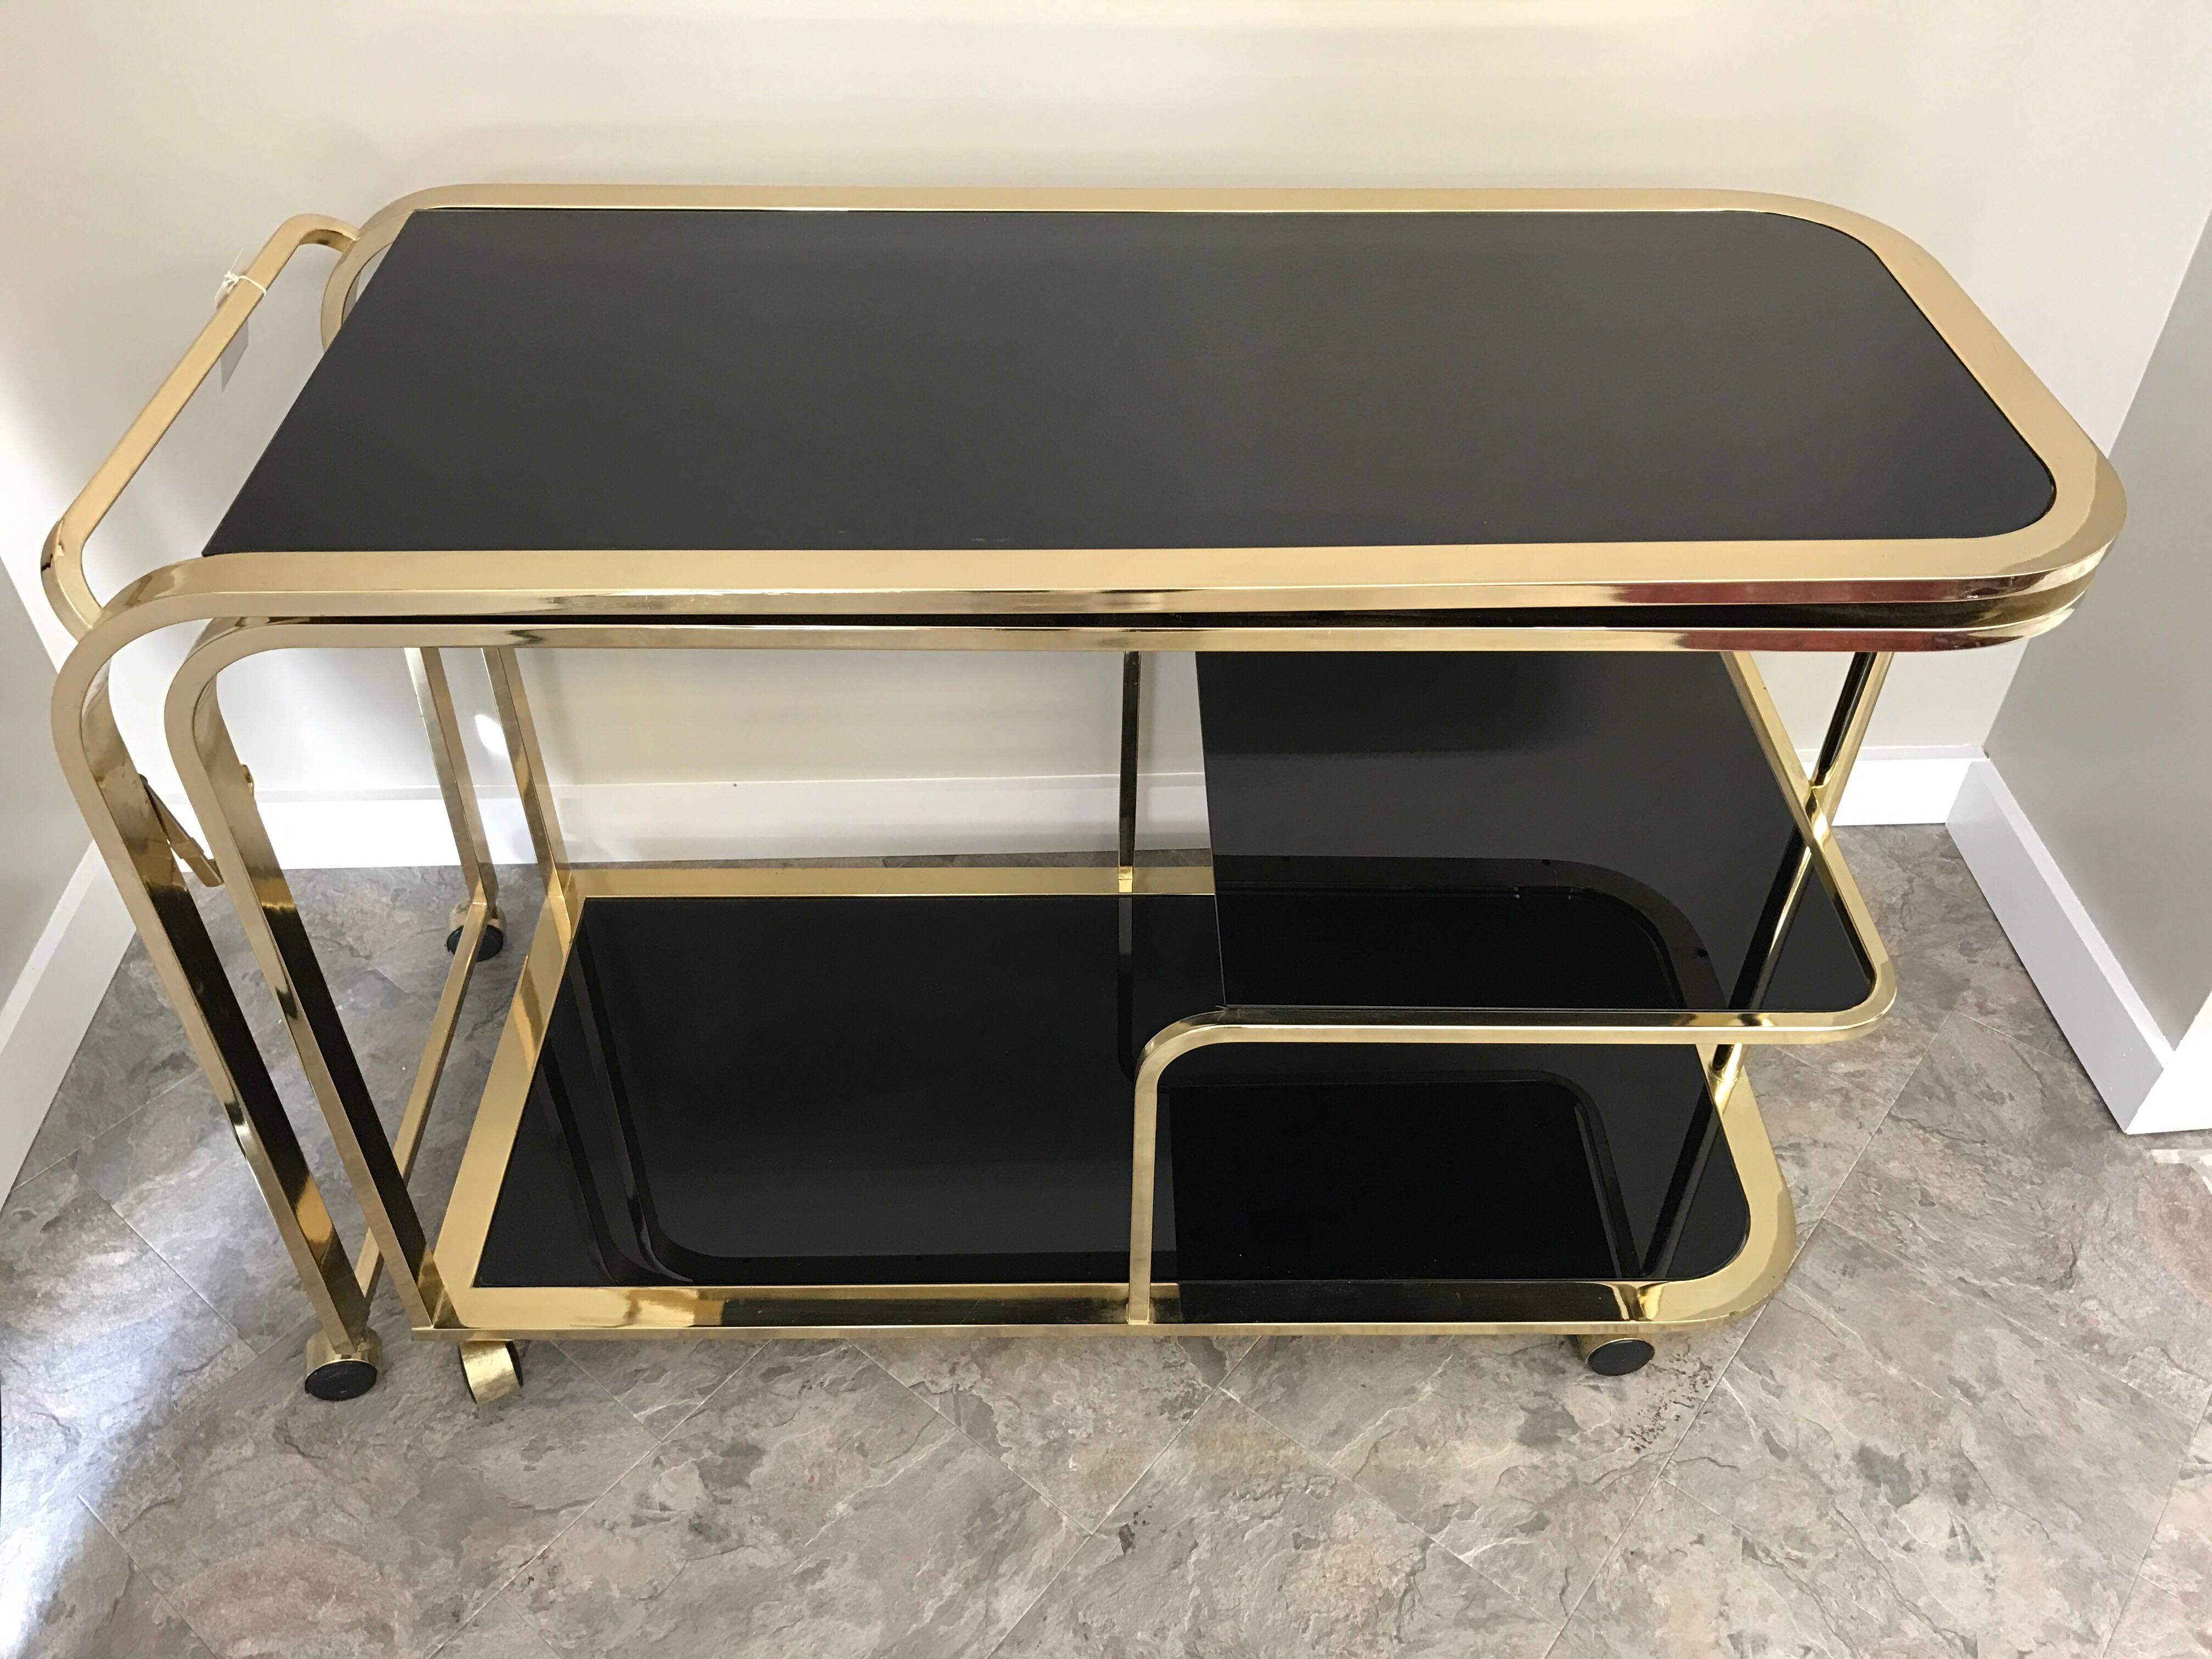 Coveted early 1970s black glass and brass bar or tea cart designed by Milo Baughman for the Design Institute of America. This unique rolling cart can expand into an L-shape and is 87 inches wide when fully expanded. The rare color scheme makes this